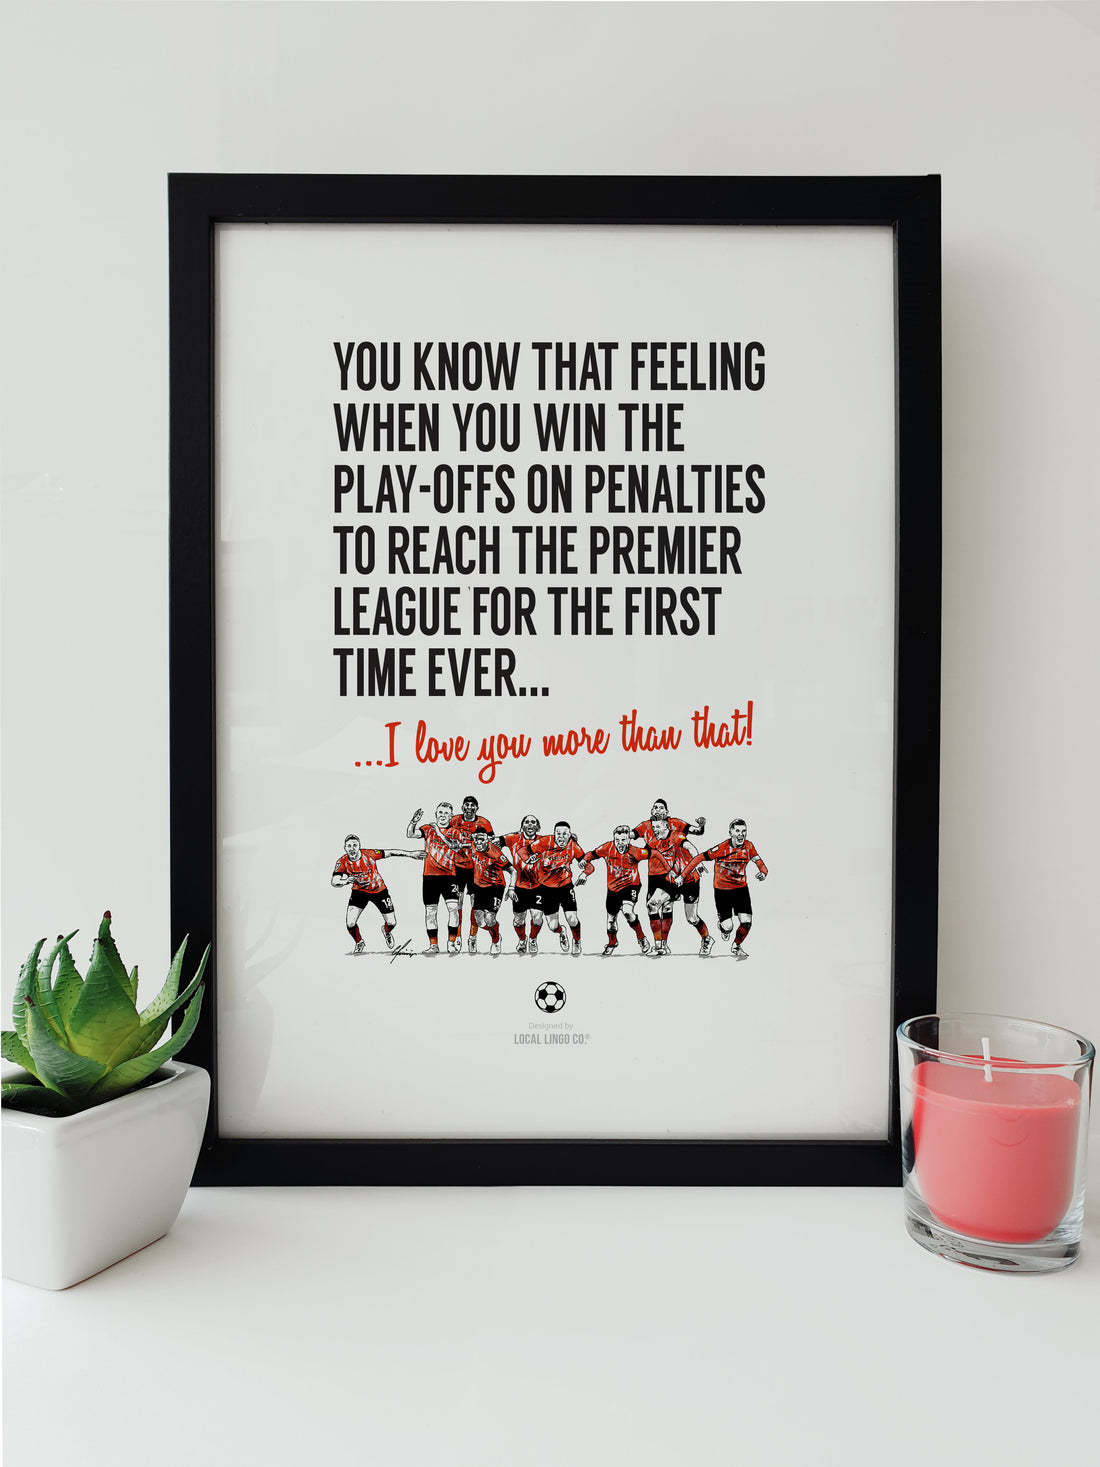 Luton Town FC Premier League Promotion A4 Print - Celebratory Illustration of Players After Winning Penalty in Play-Off Final designed by local lingo